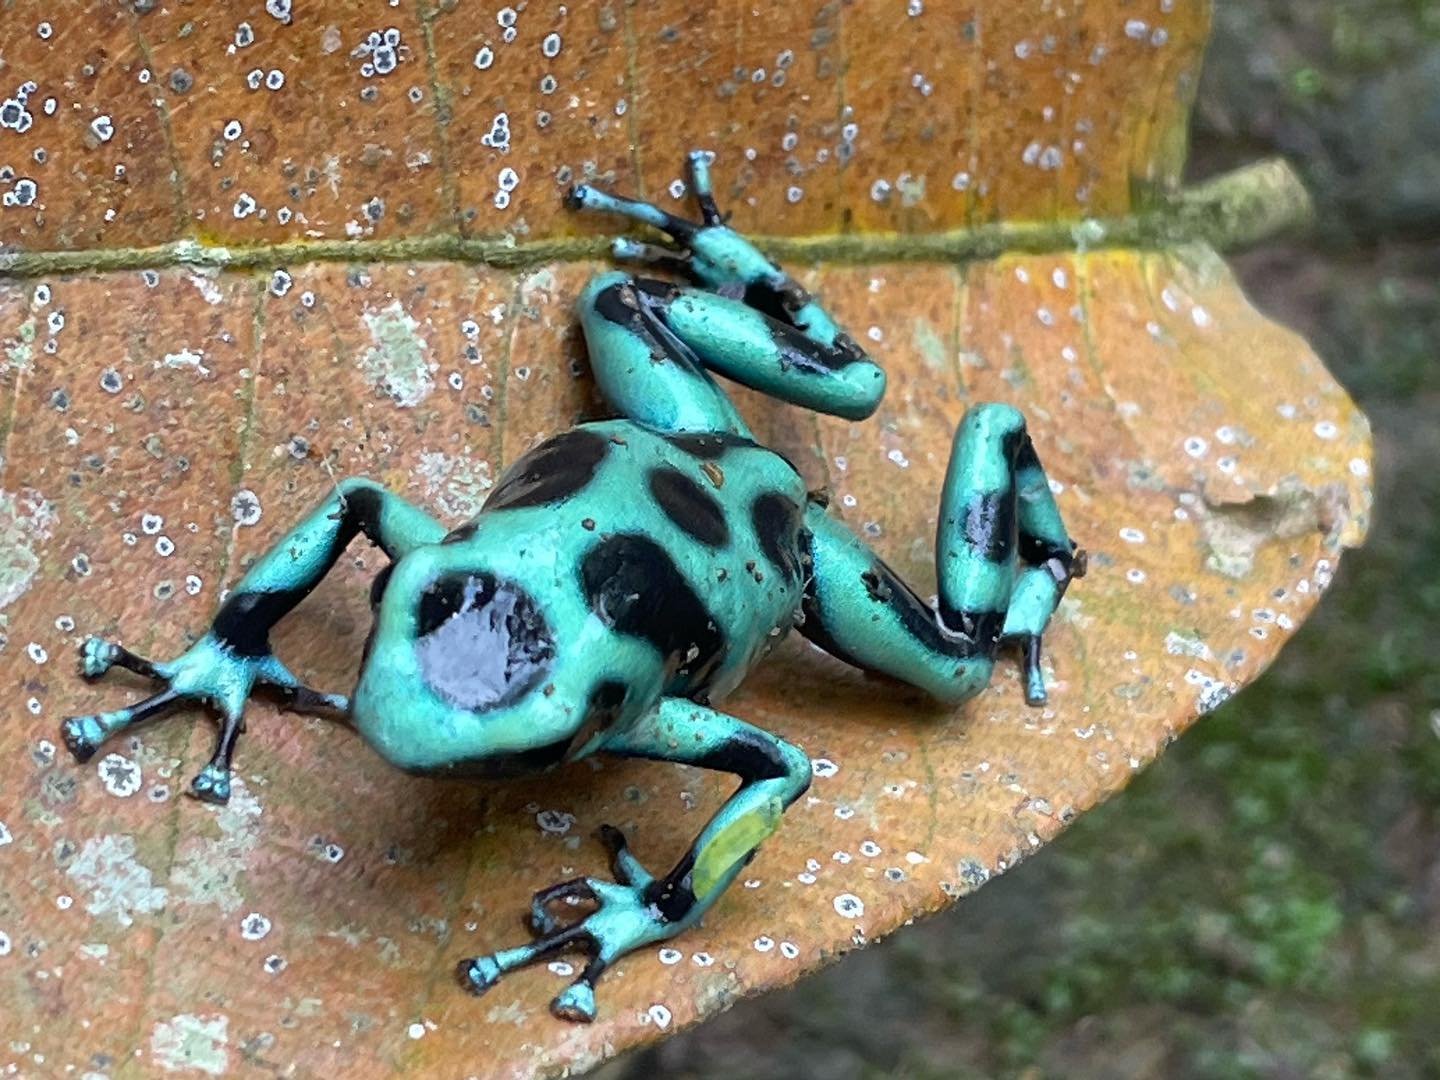 Dart Frog for colour inspo alone, nature doing its thing so well.